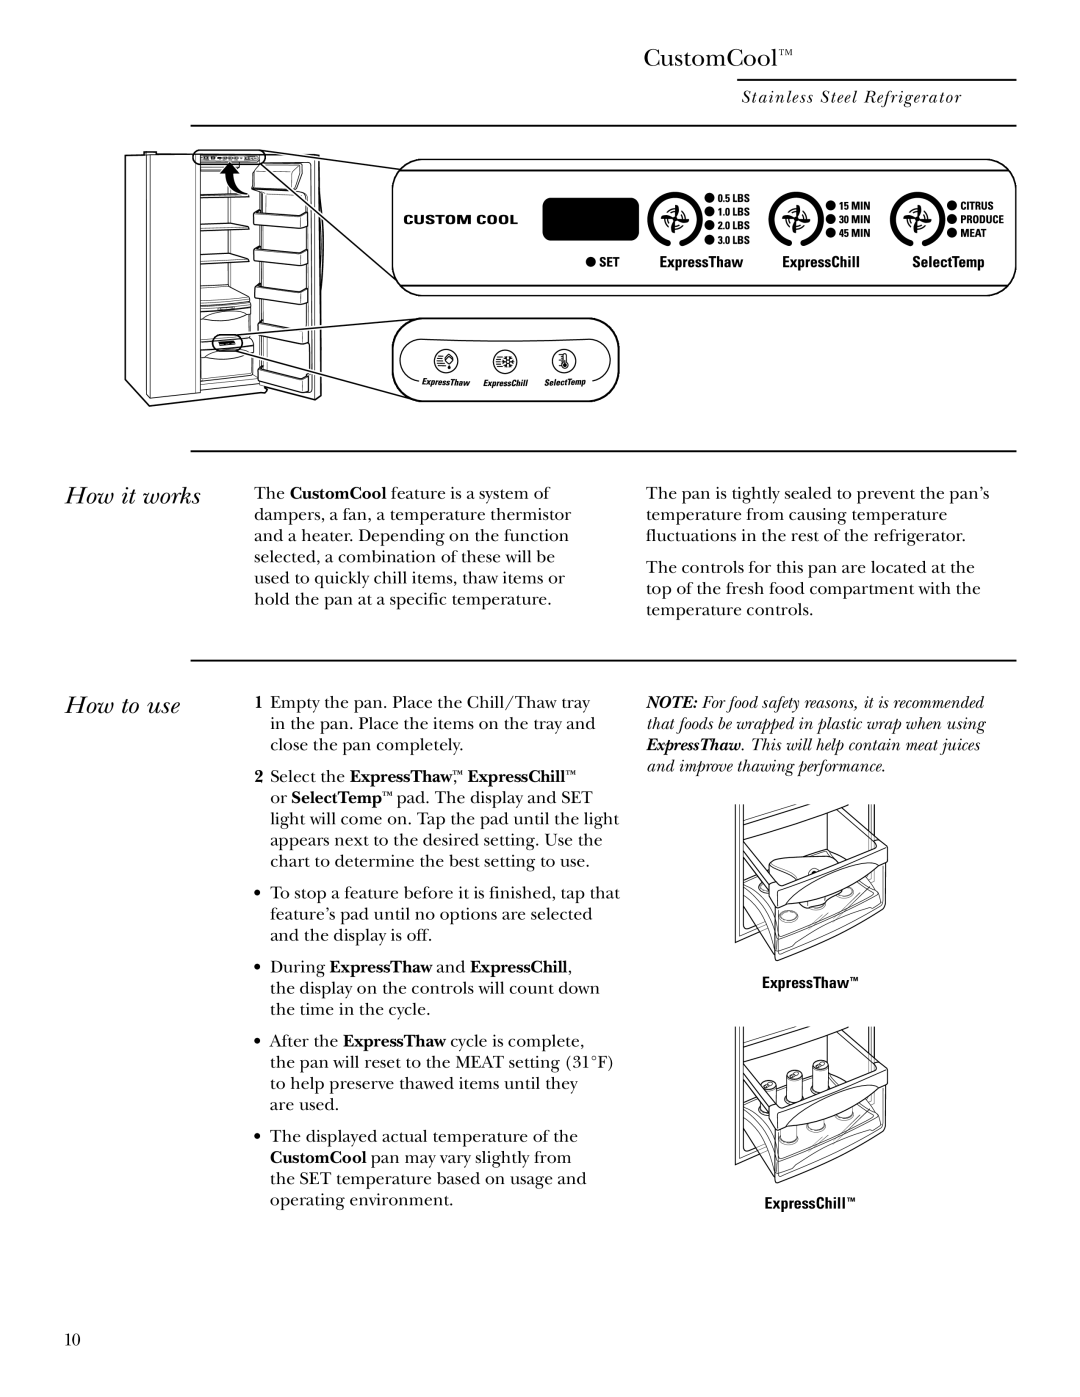 GE Monogram owner manual CustomCool, How it works, How to use, Stainless Steel Refrigerator 